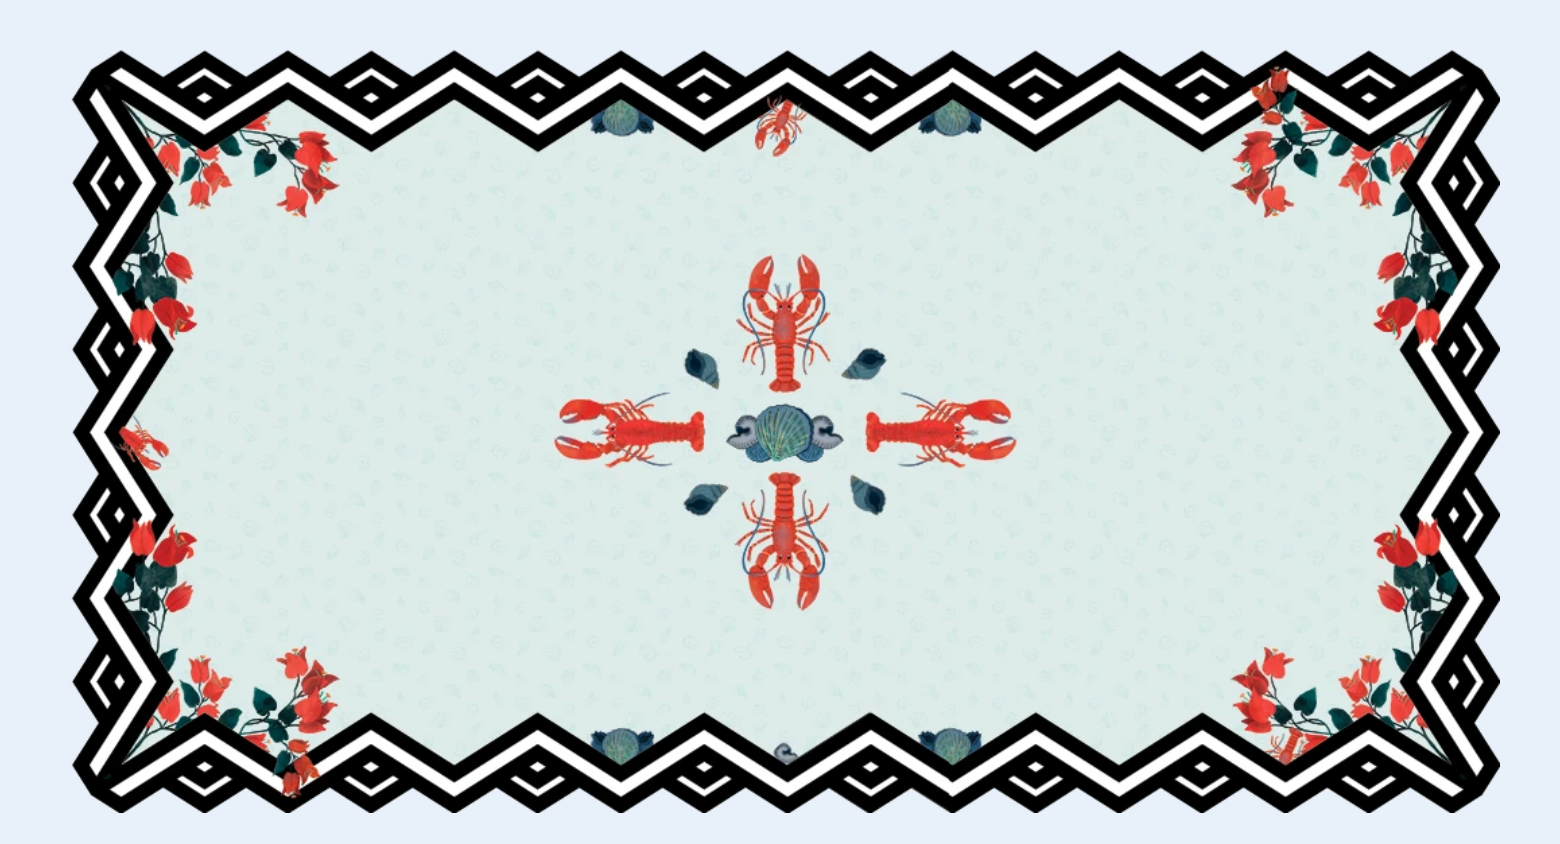  Overhead view of "summer" tablecloth pattern: Light blue background with bold black and white chevron design along border, interlaced with red flowers. In the center are four lobsters arranged in a cross, alternating with other seashells.